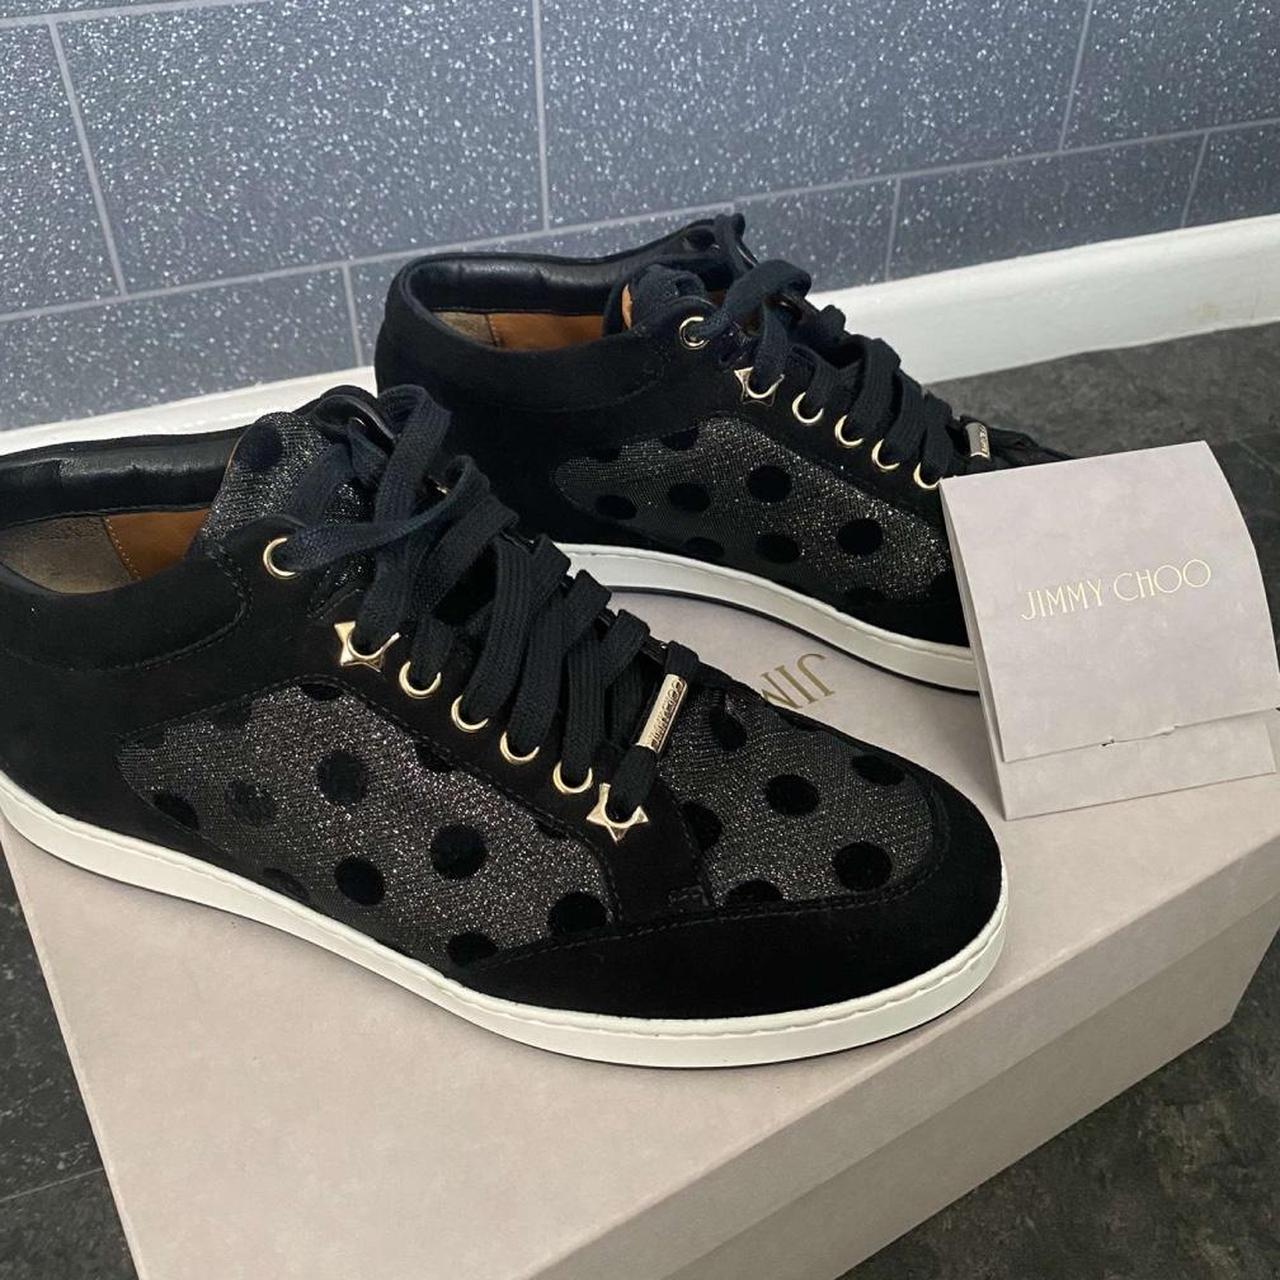 Jimmy choo Morton cut out sneaker trainer. They are - Depop